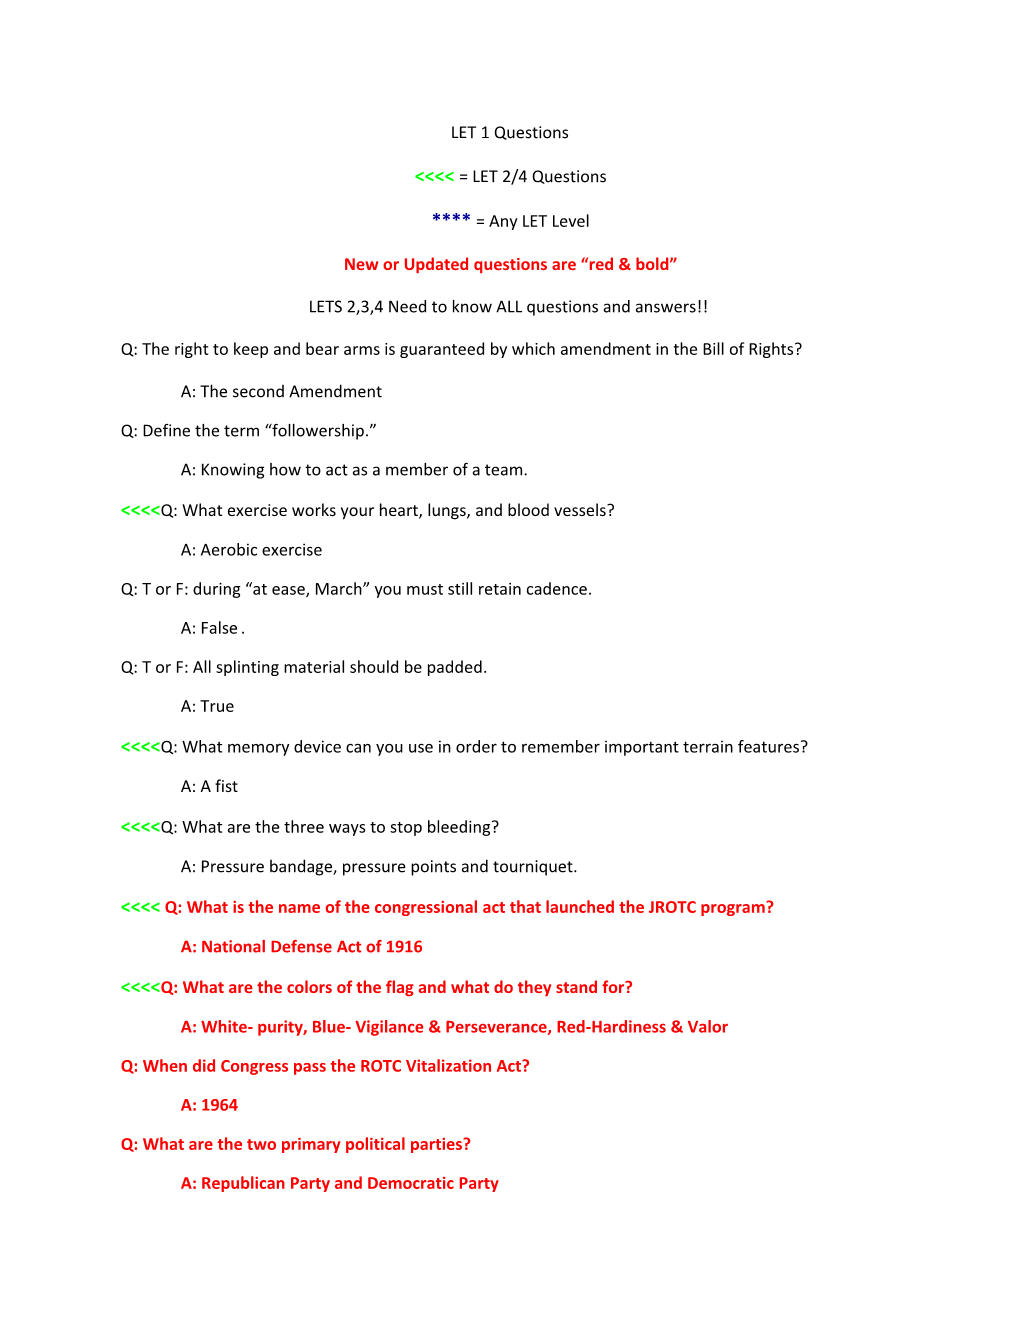 New Or Updated Questions Are Red & Bold